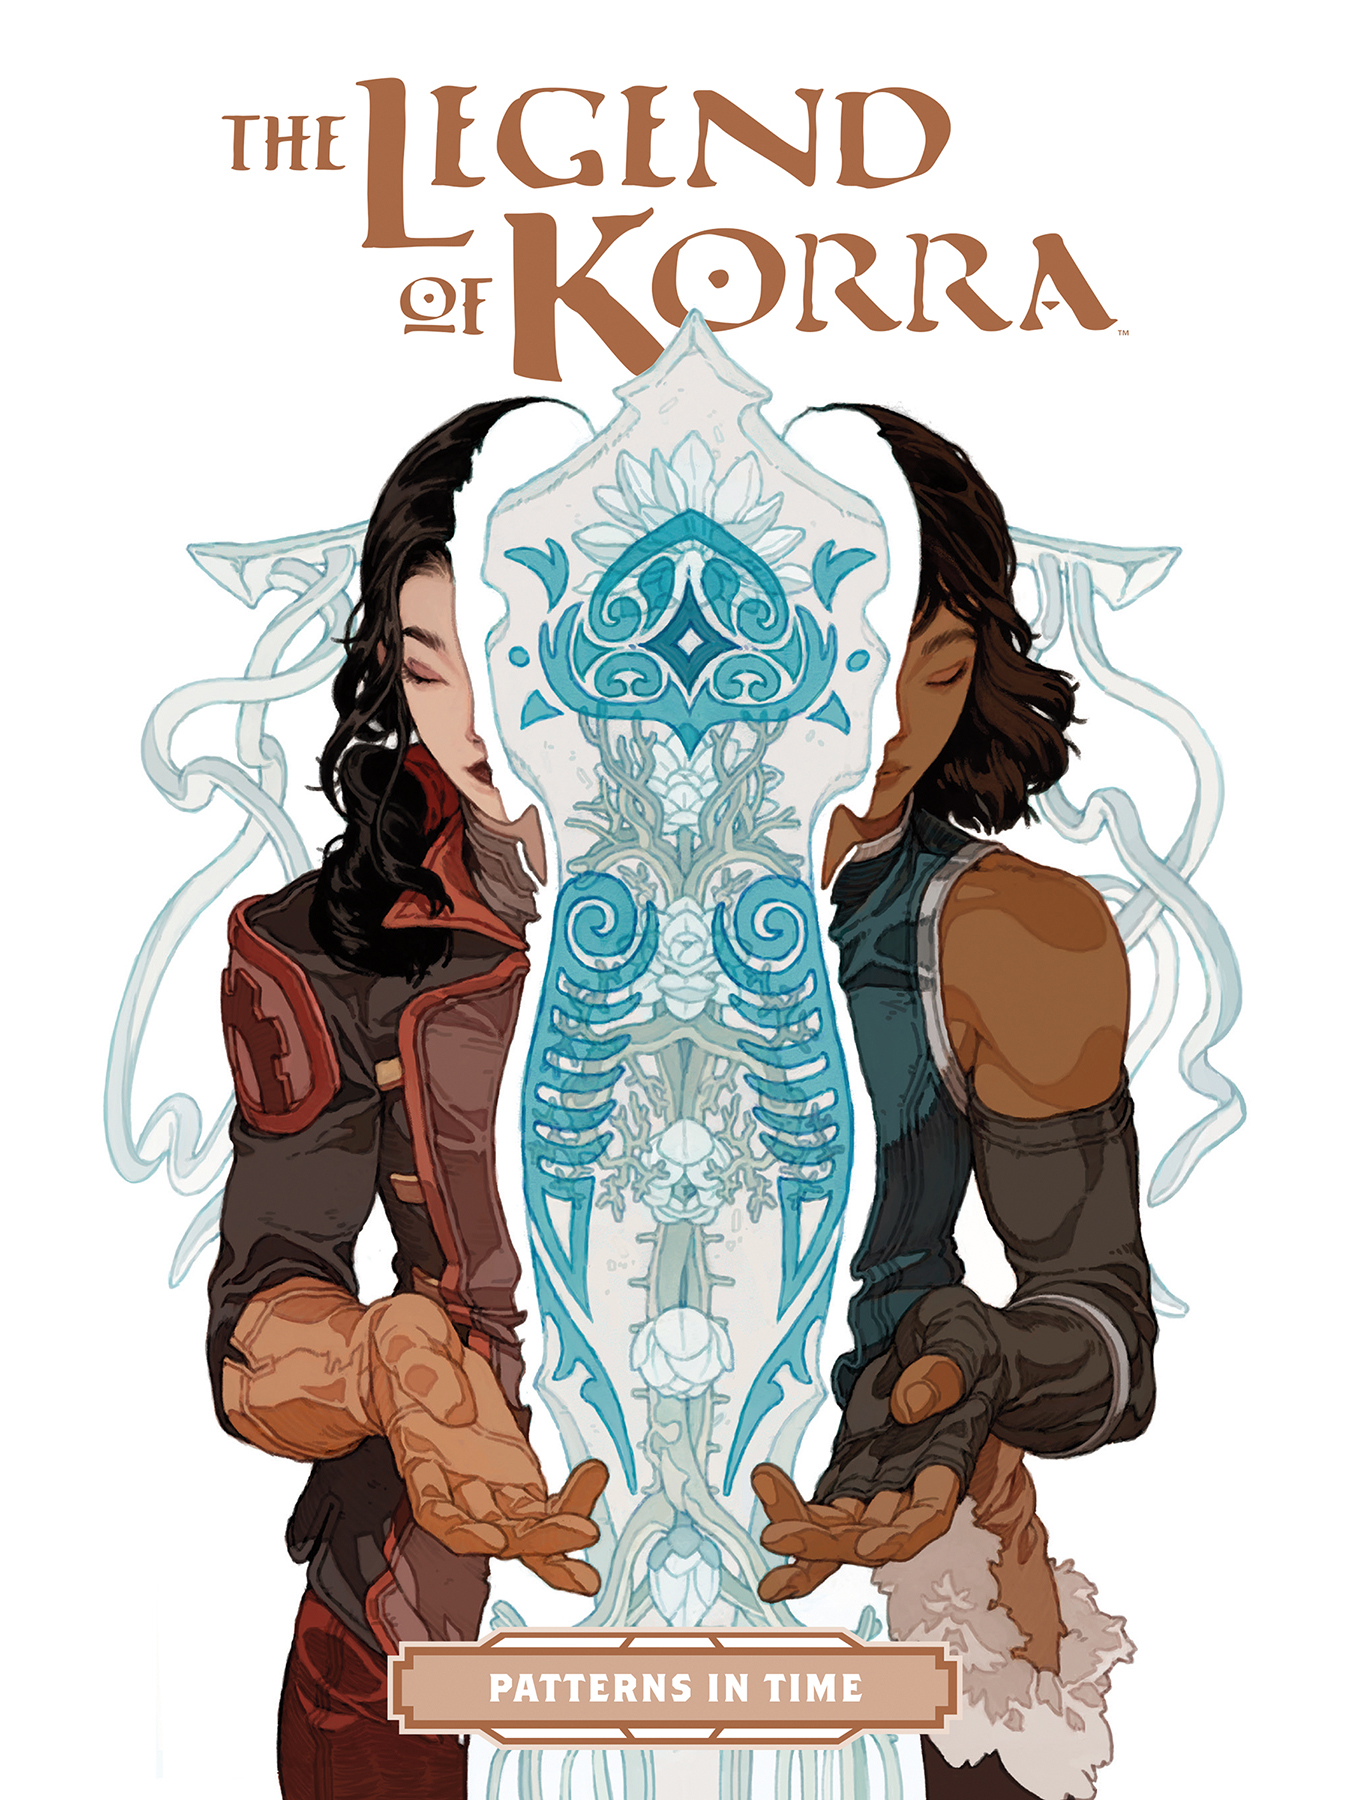 First 5 Minutes of The Legend of Korra   Avatar  YouTube